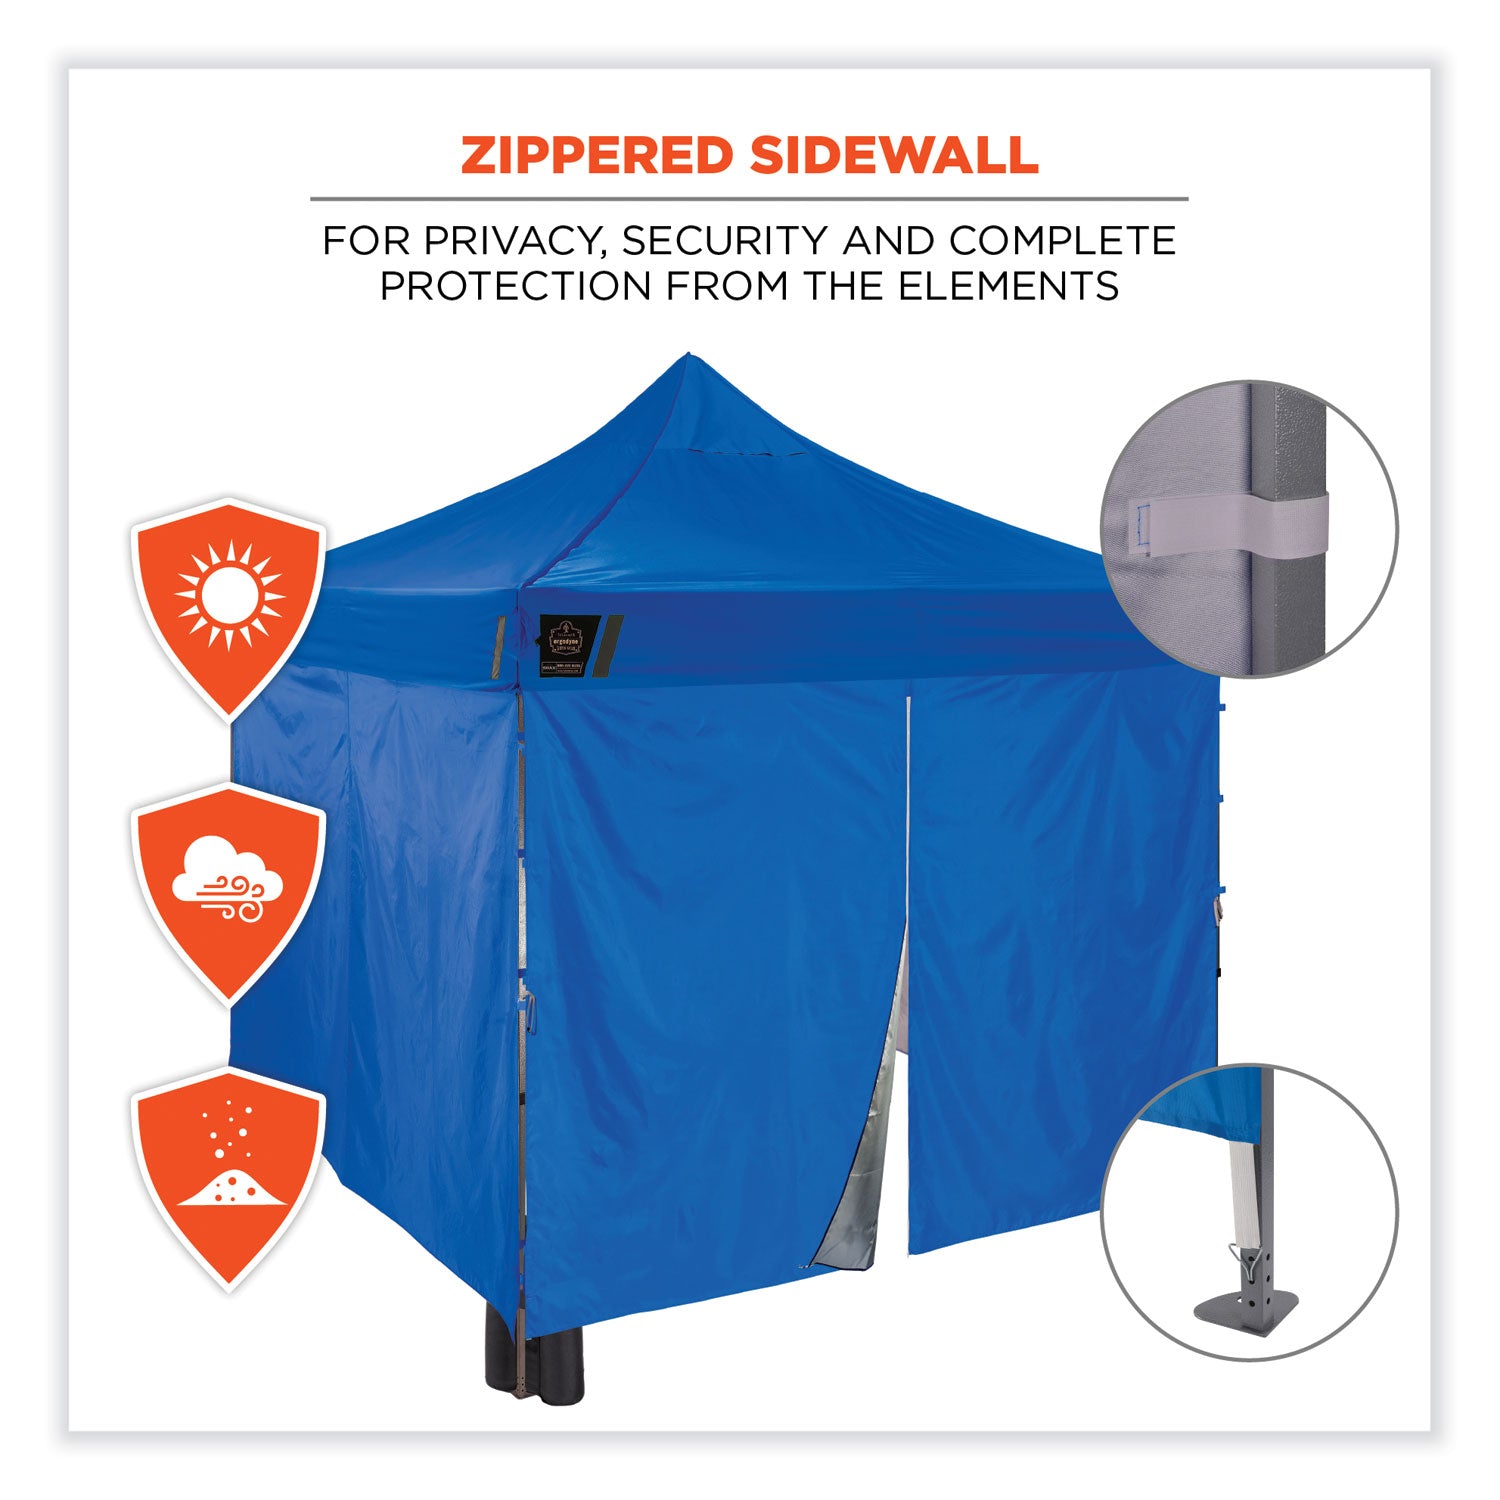 shax-6053-enclosed-pop-up-tent-kit-single-skin-10-ft-x-10-ft-polyester-steel-blue-ships-in-1-3-business-days_ego12977 - 4